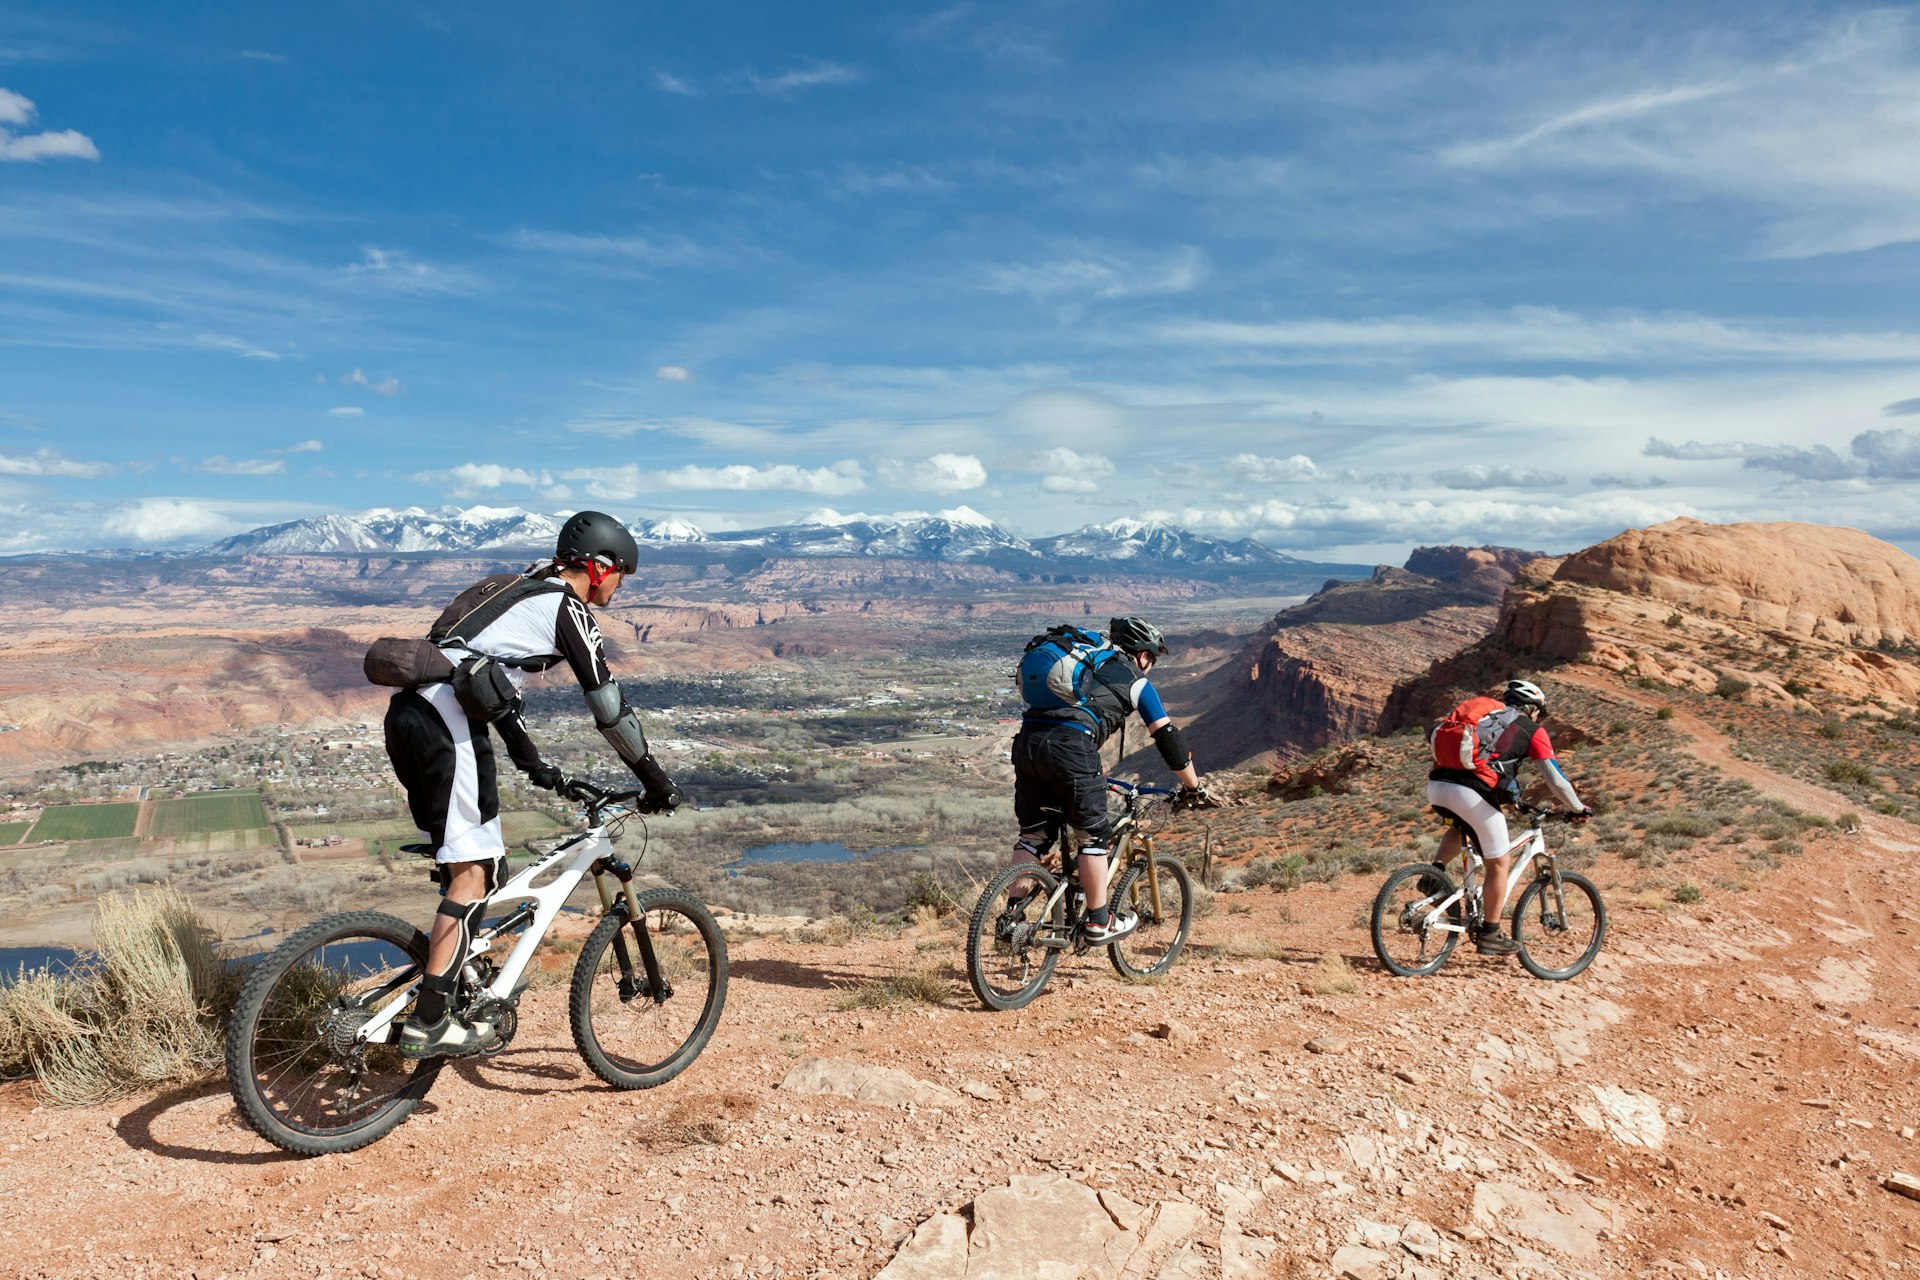 Three people bike on a ridge in Moab, with red rock formations visible in the distance